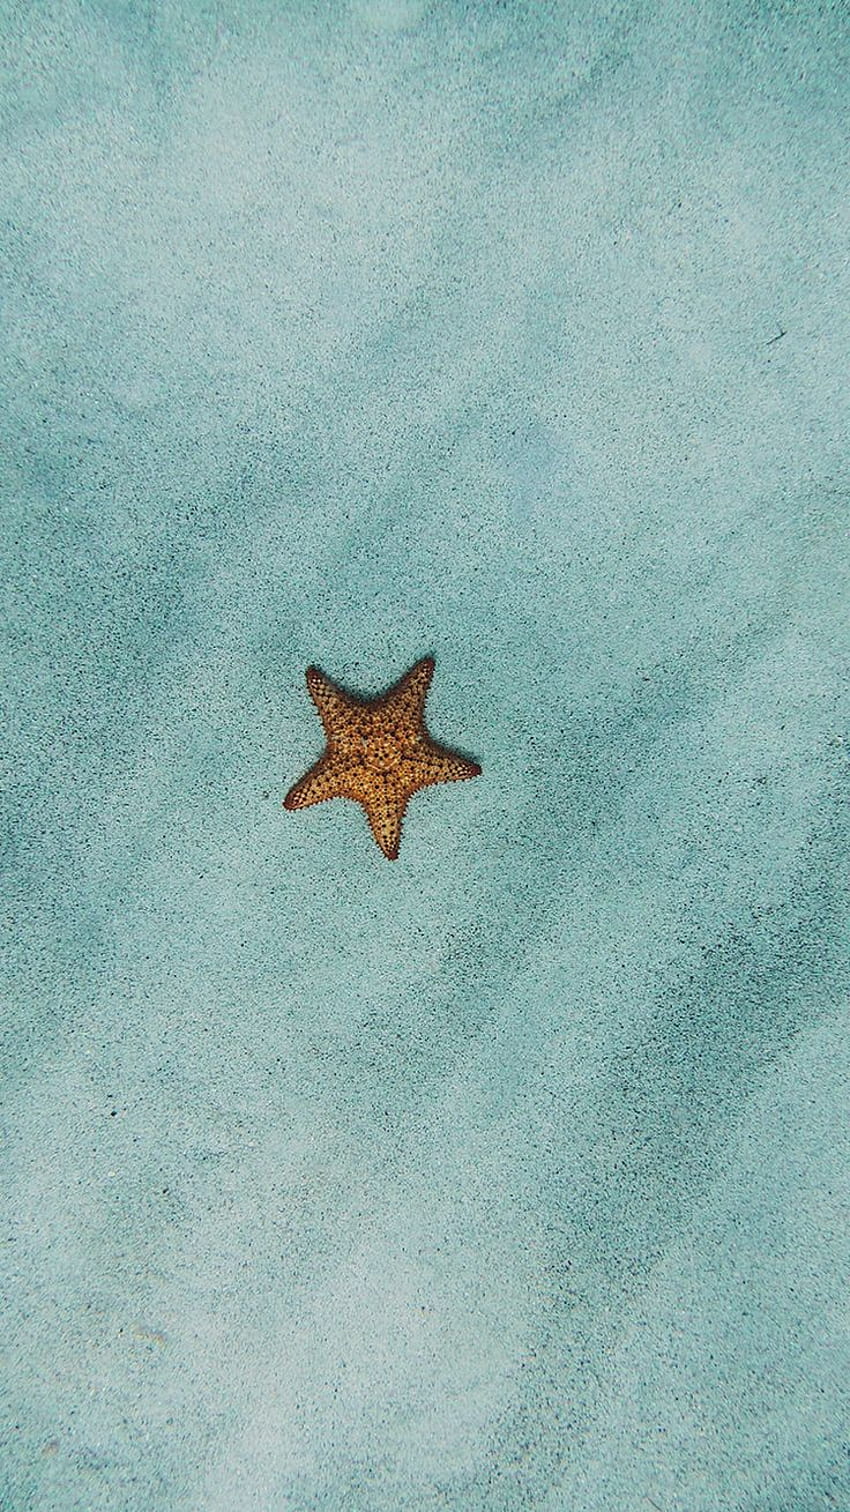 A starfish on the sandy bottom of the ocean - Starfish, clean